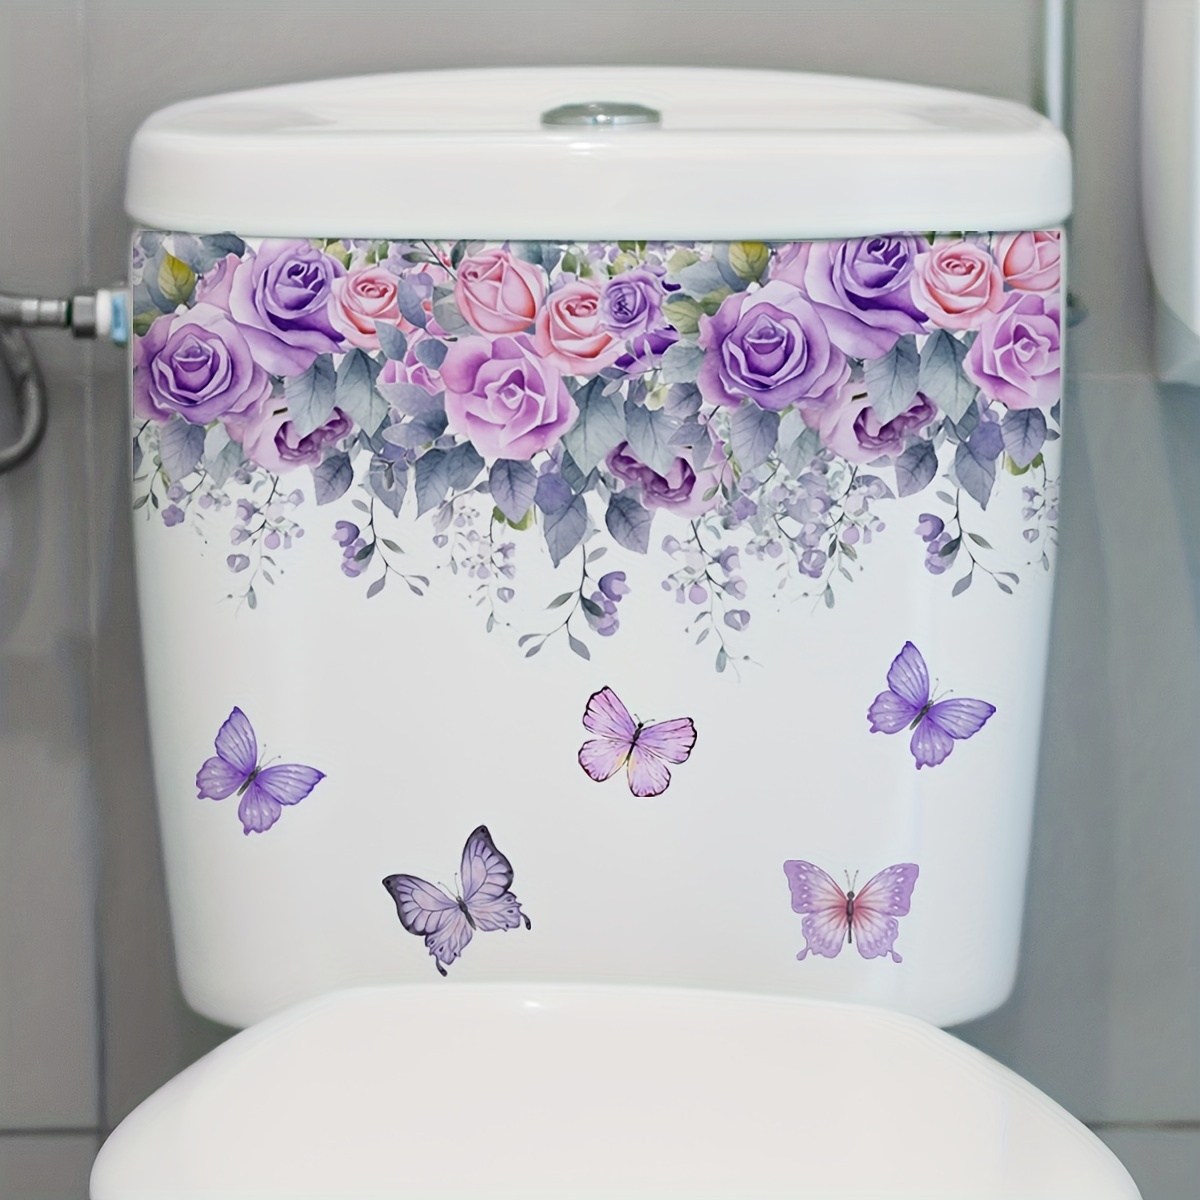 

1pc Floral And Butterfly Toilet Sticker, Purple Roses Decorative Wall Decal, Self-adhesive Plastic, Bathroom Decoration, Aesthetic Home Decoration, Room Decor, Beautify Your Home